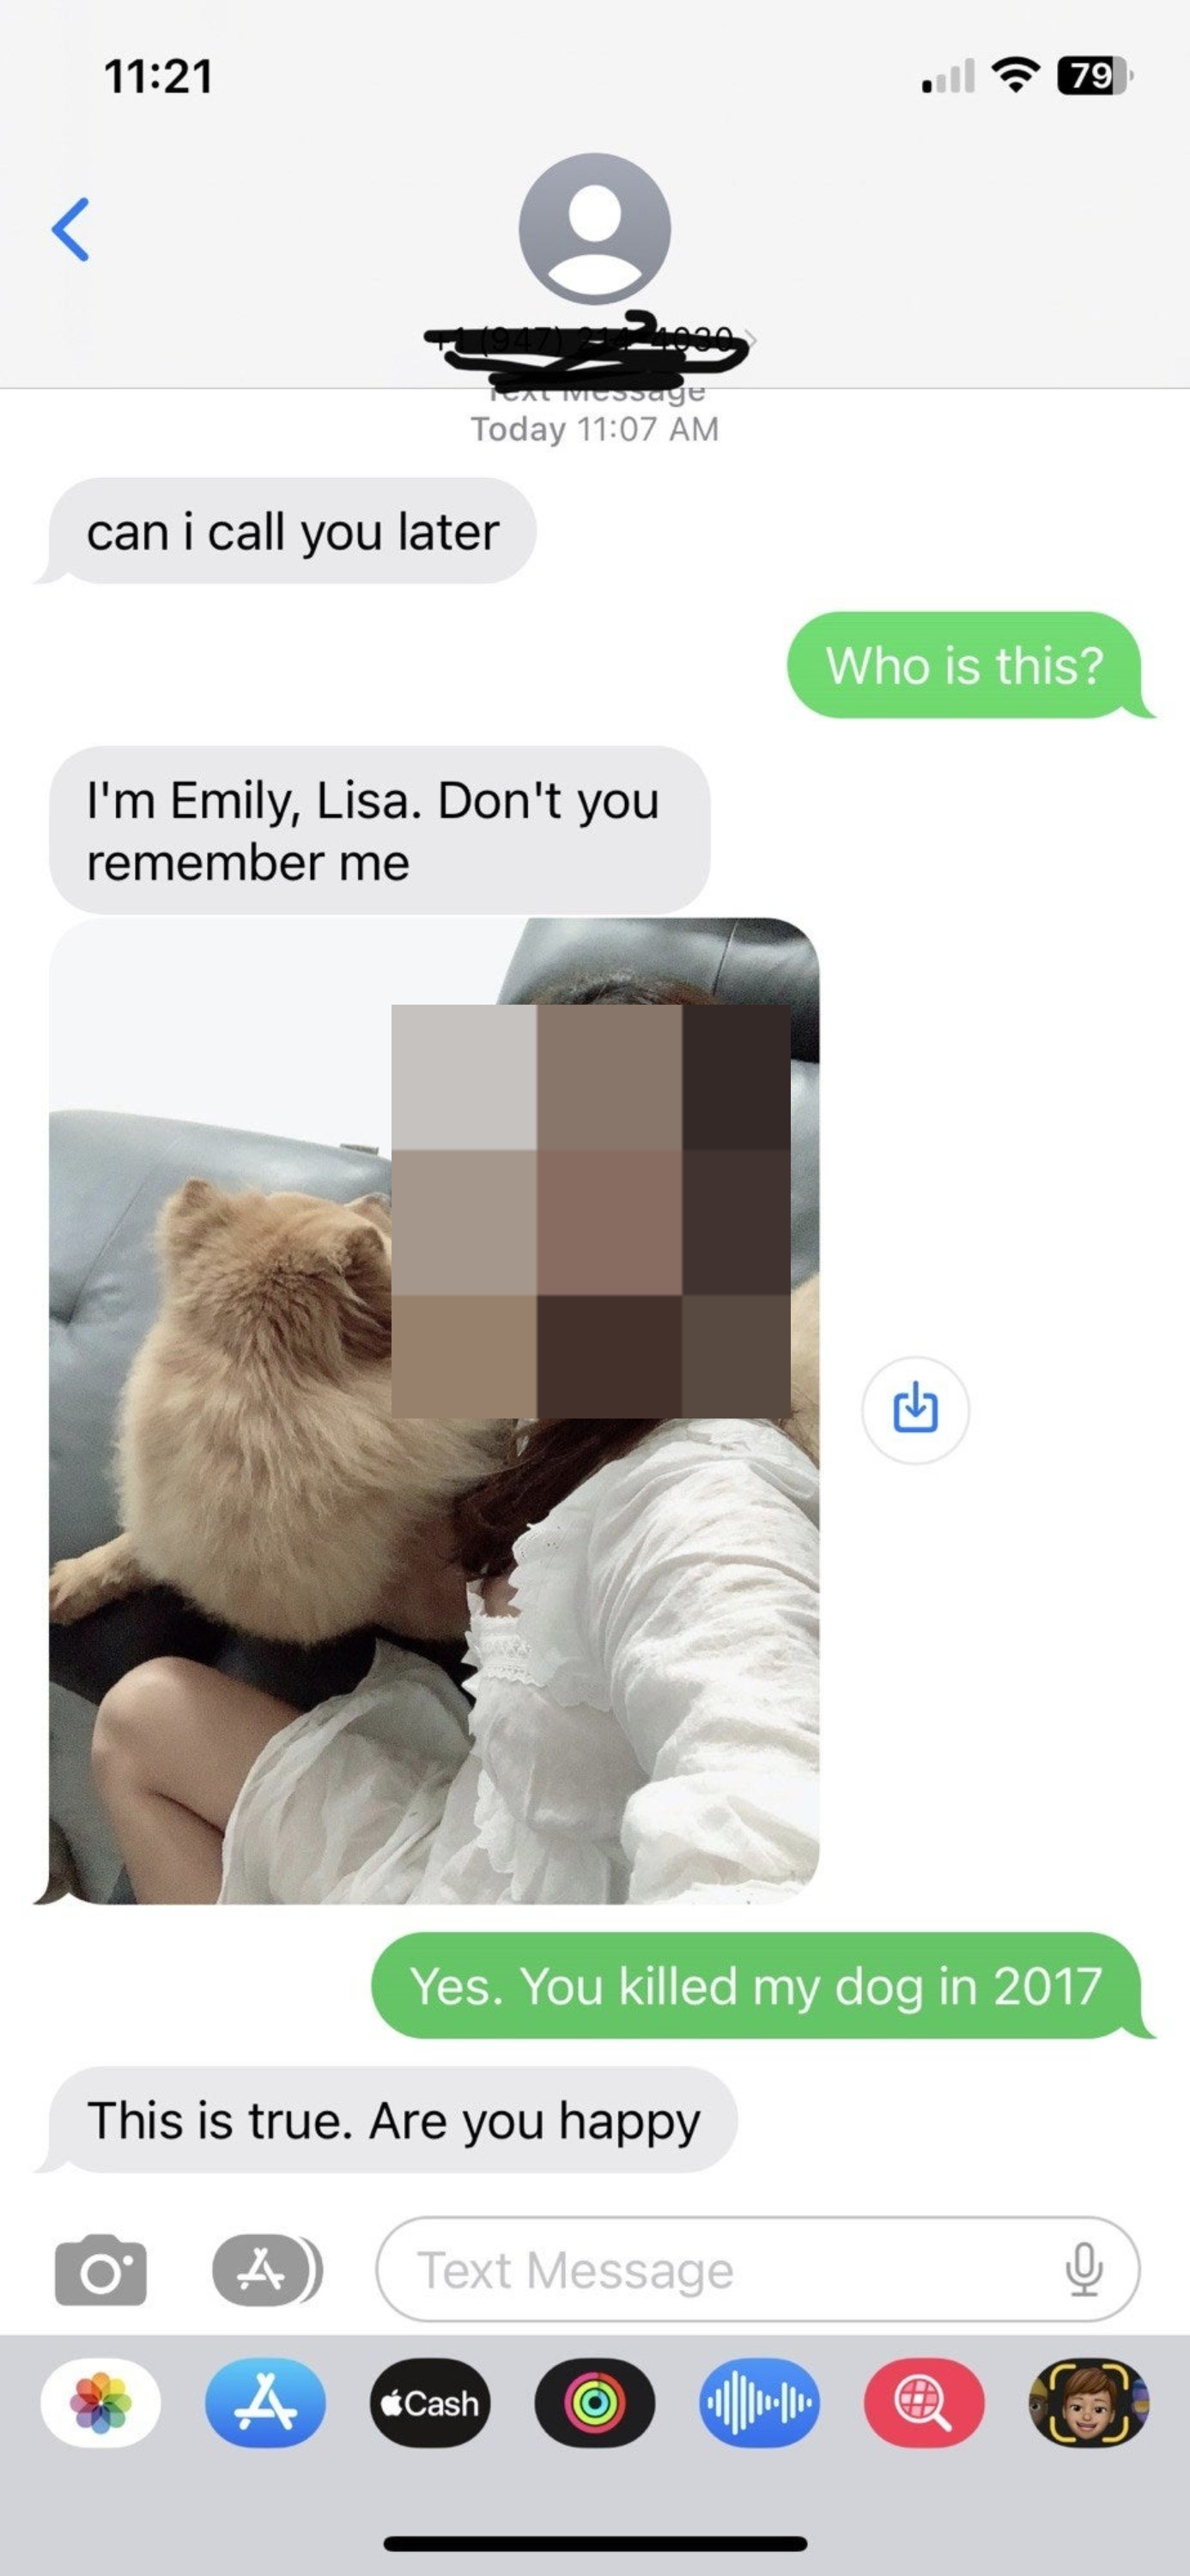 scammer asks if a person remembers them and they say yes you killed my dog